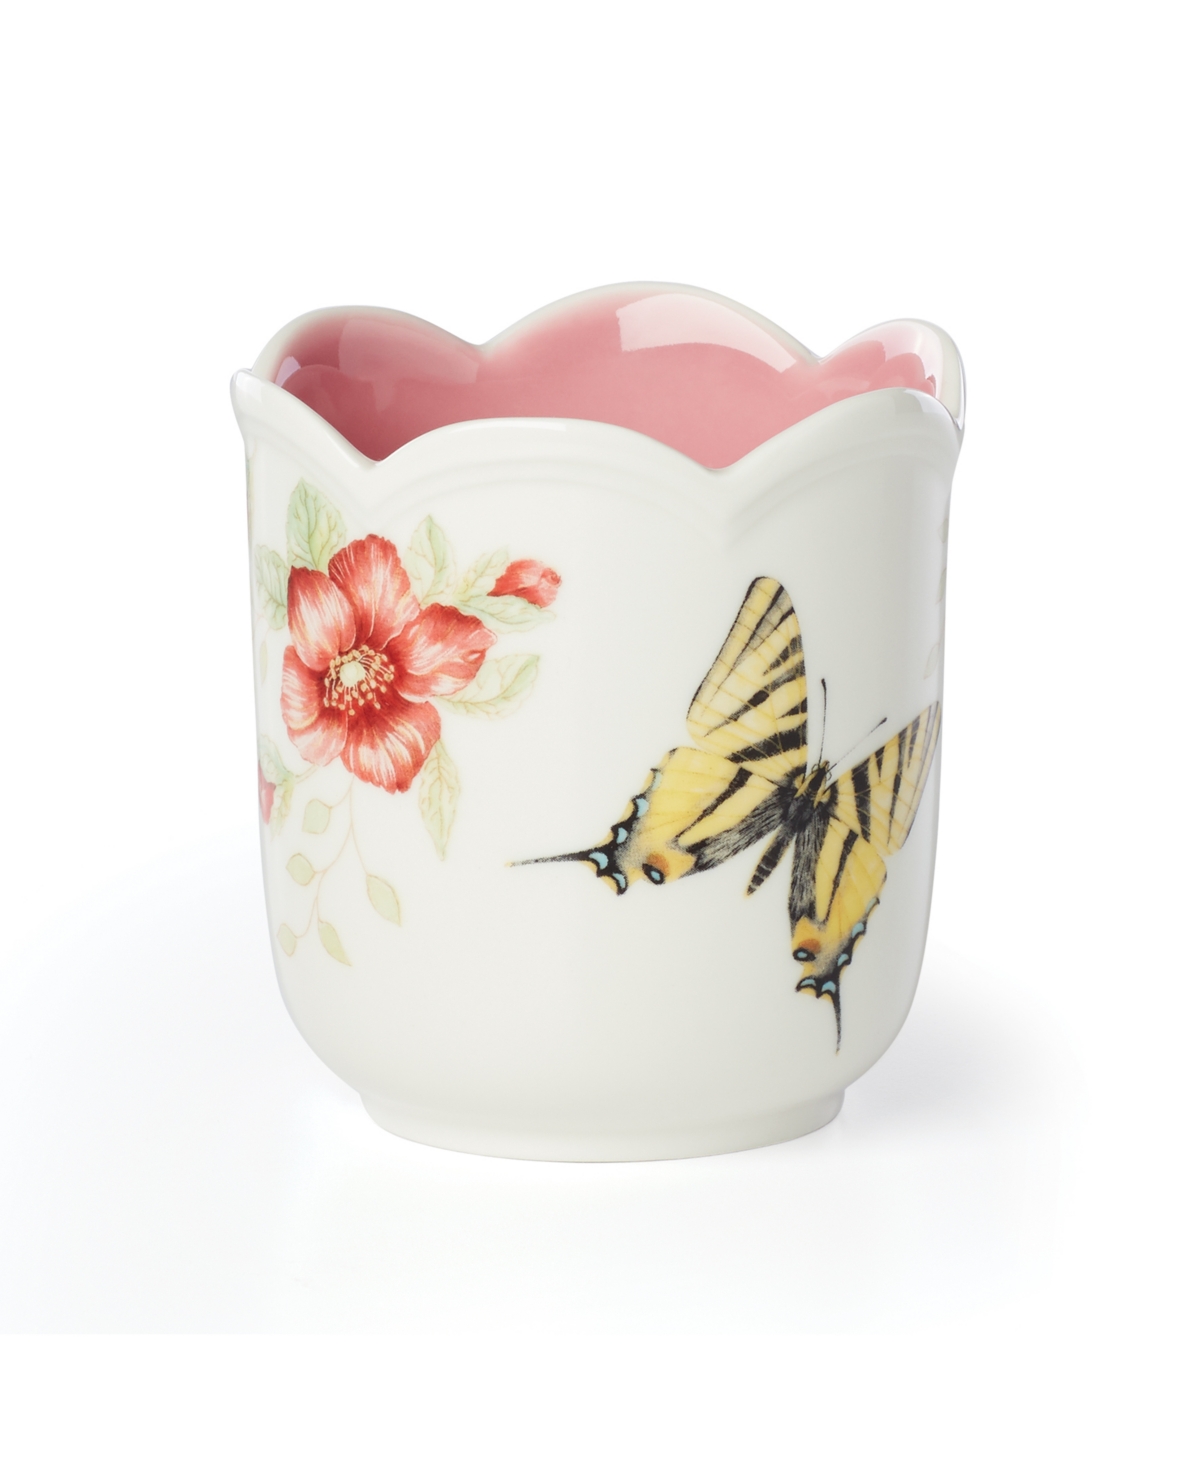 Lenox Butterfly Meadow Filled Candle, Pink Citrus